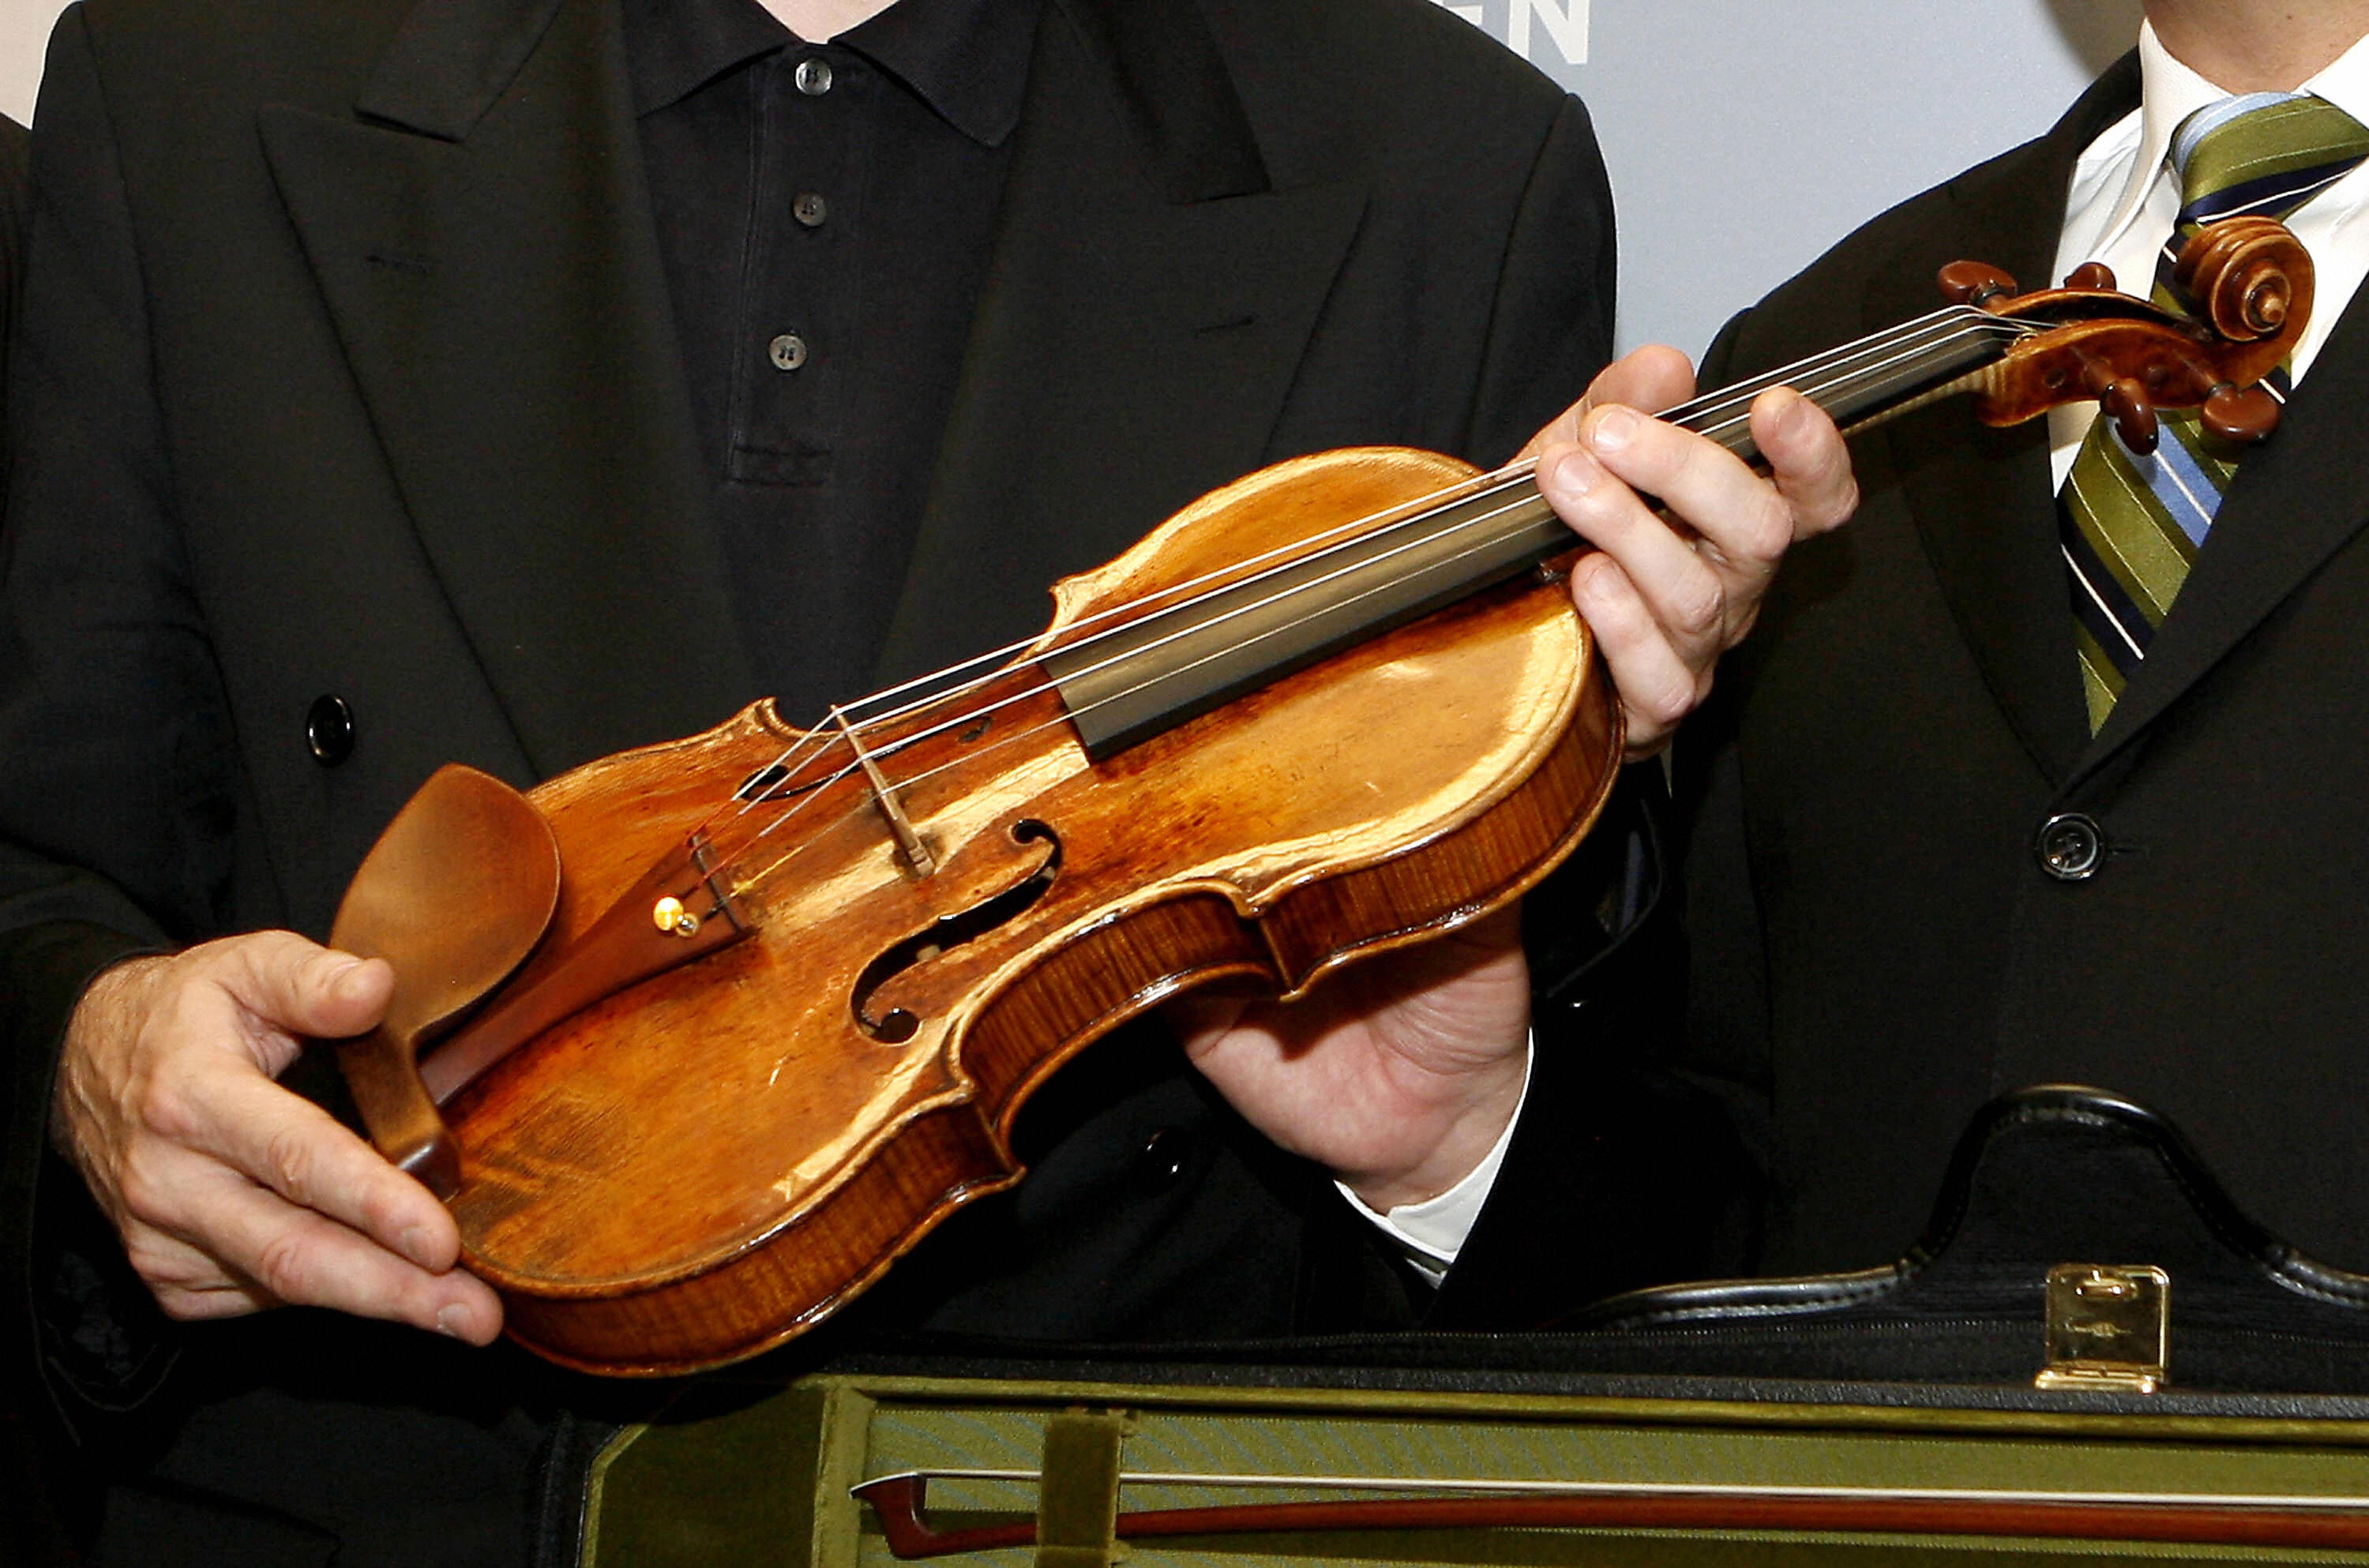 Stradivarius stringed instruments are some of the finest and most expensive instruments ever made